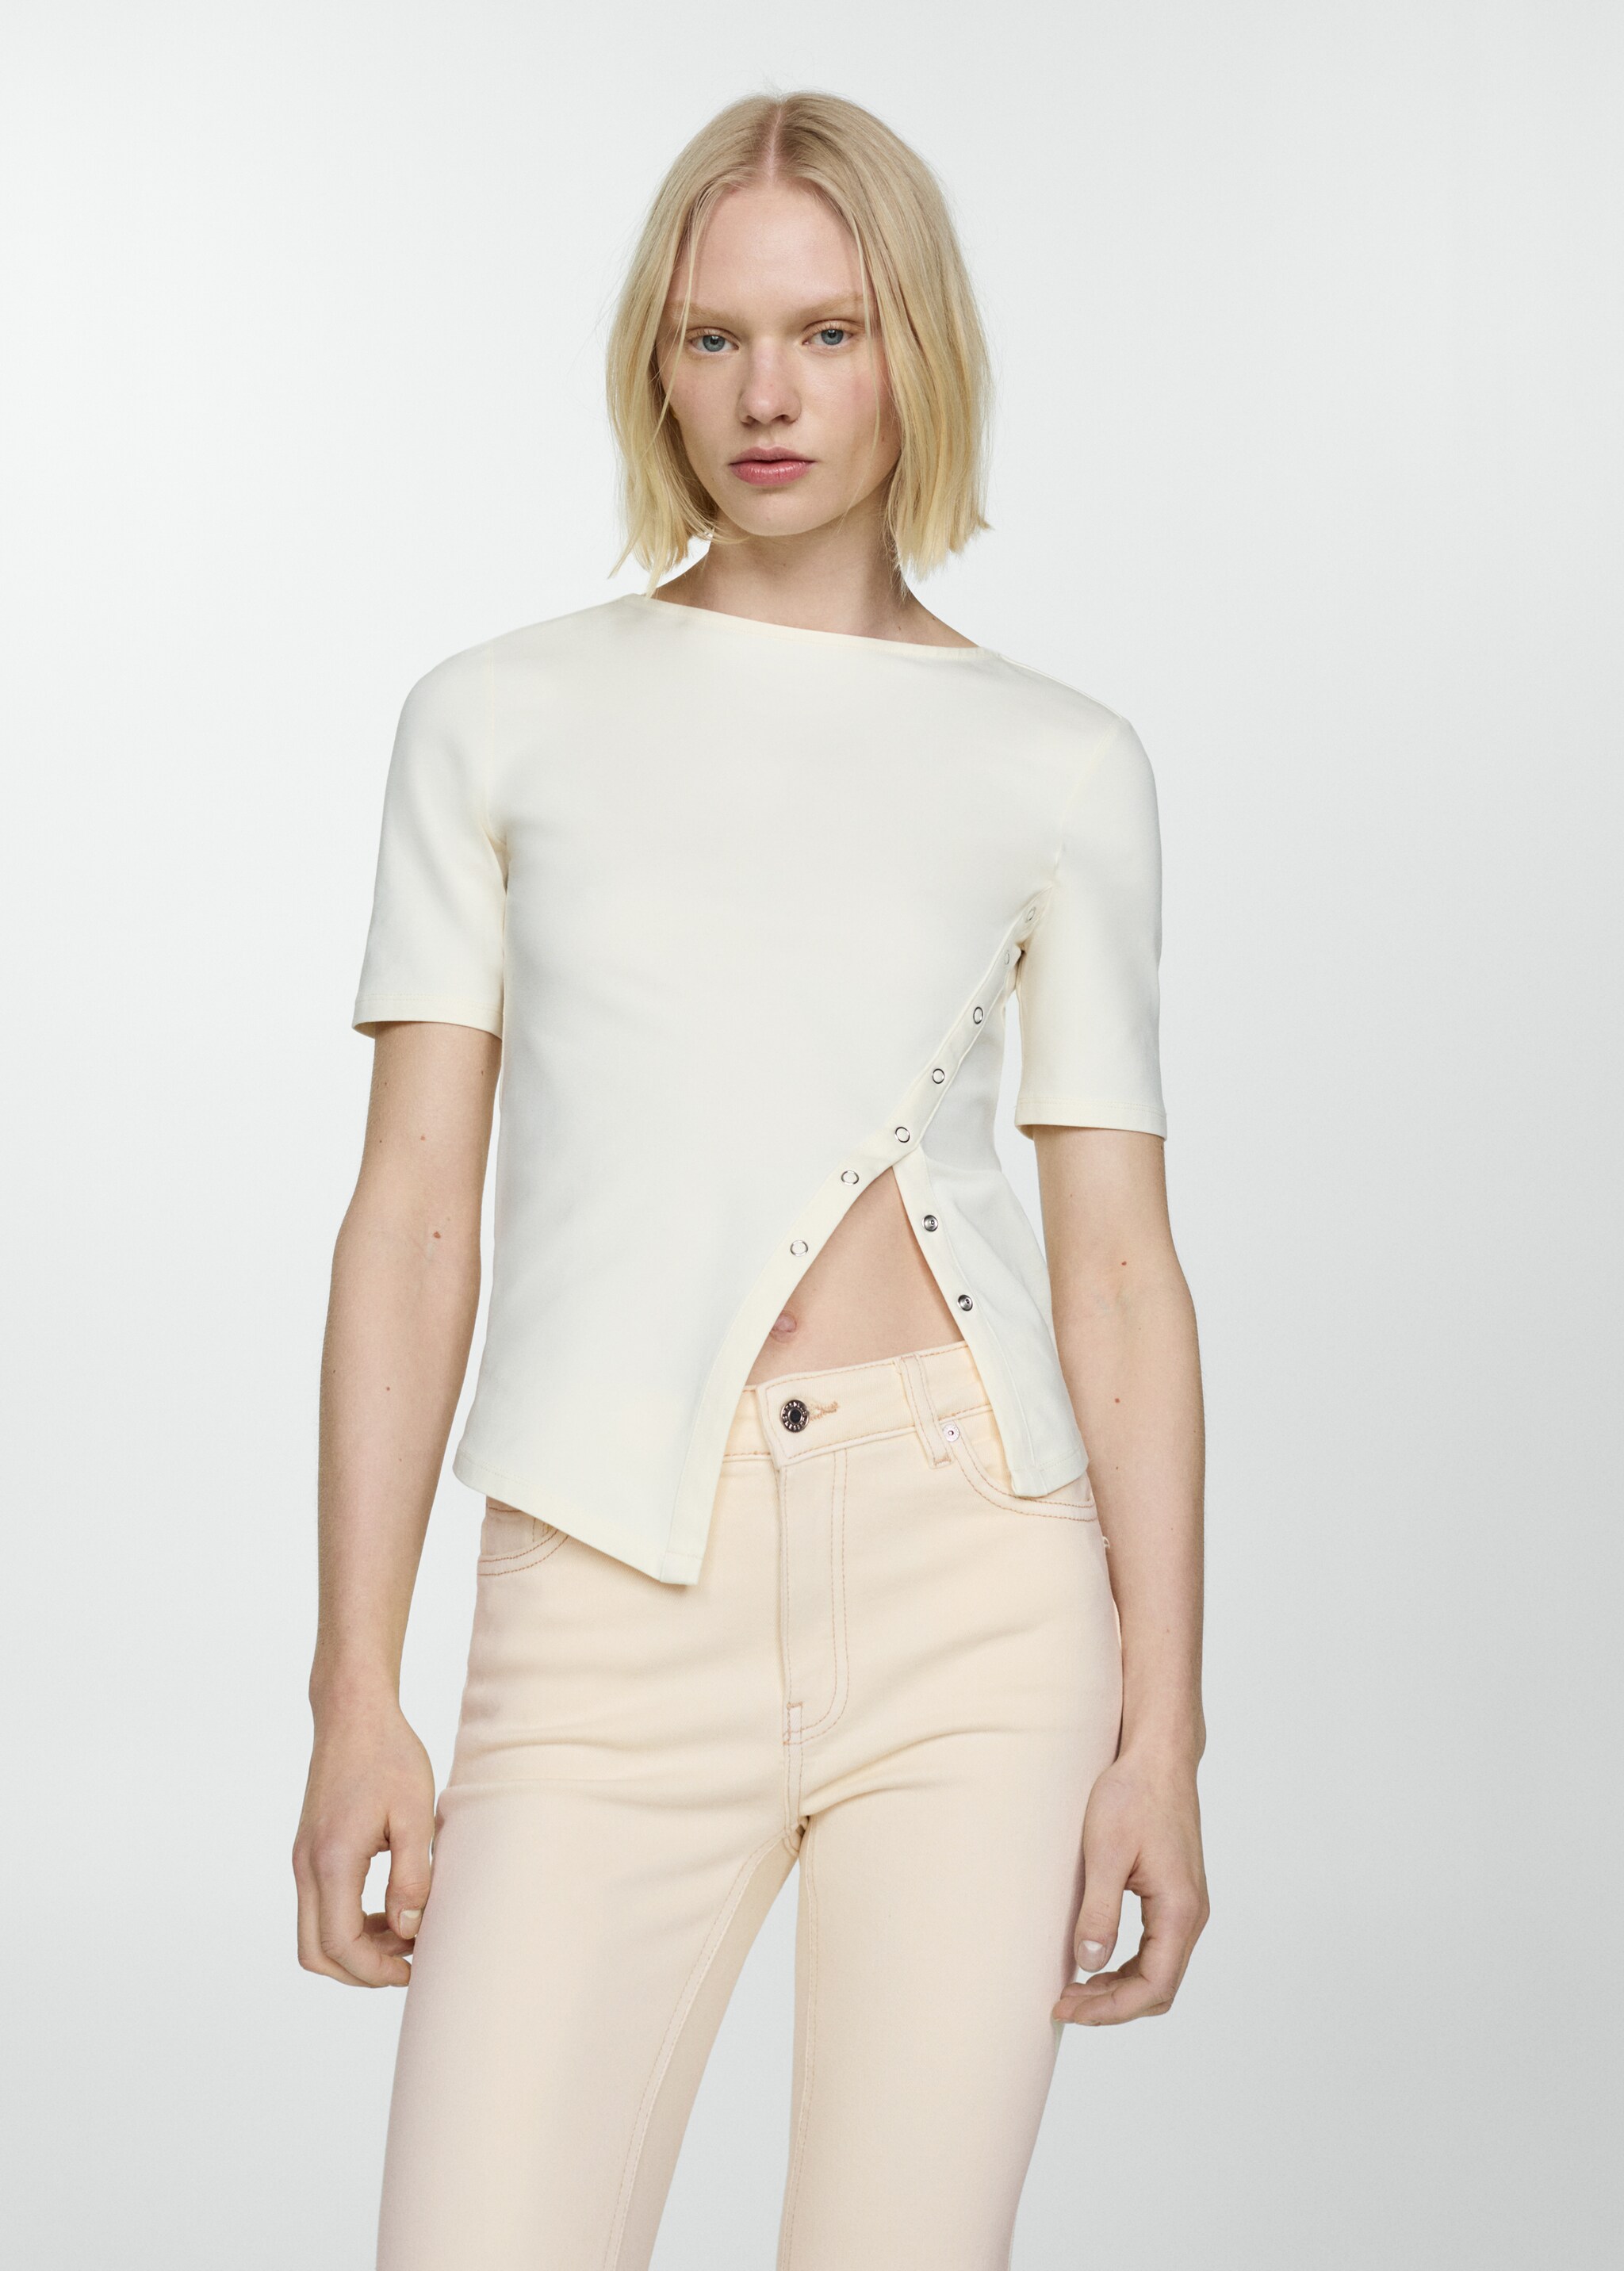 Jeans Sienna flare crop - Details of the article 1